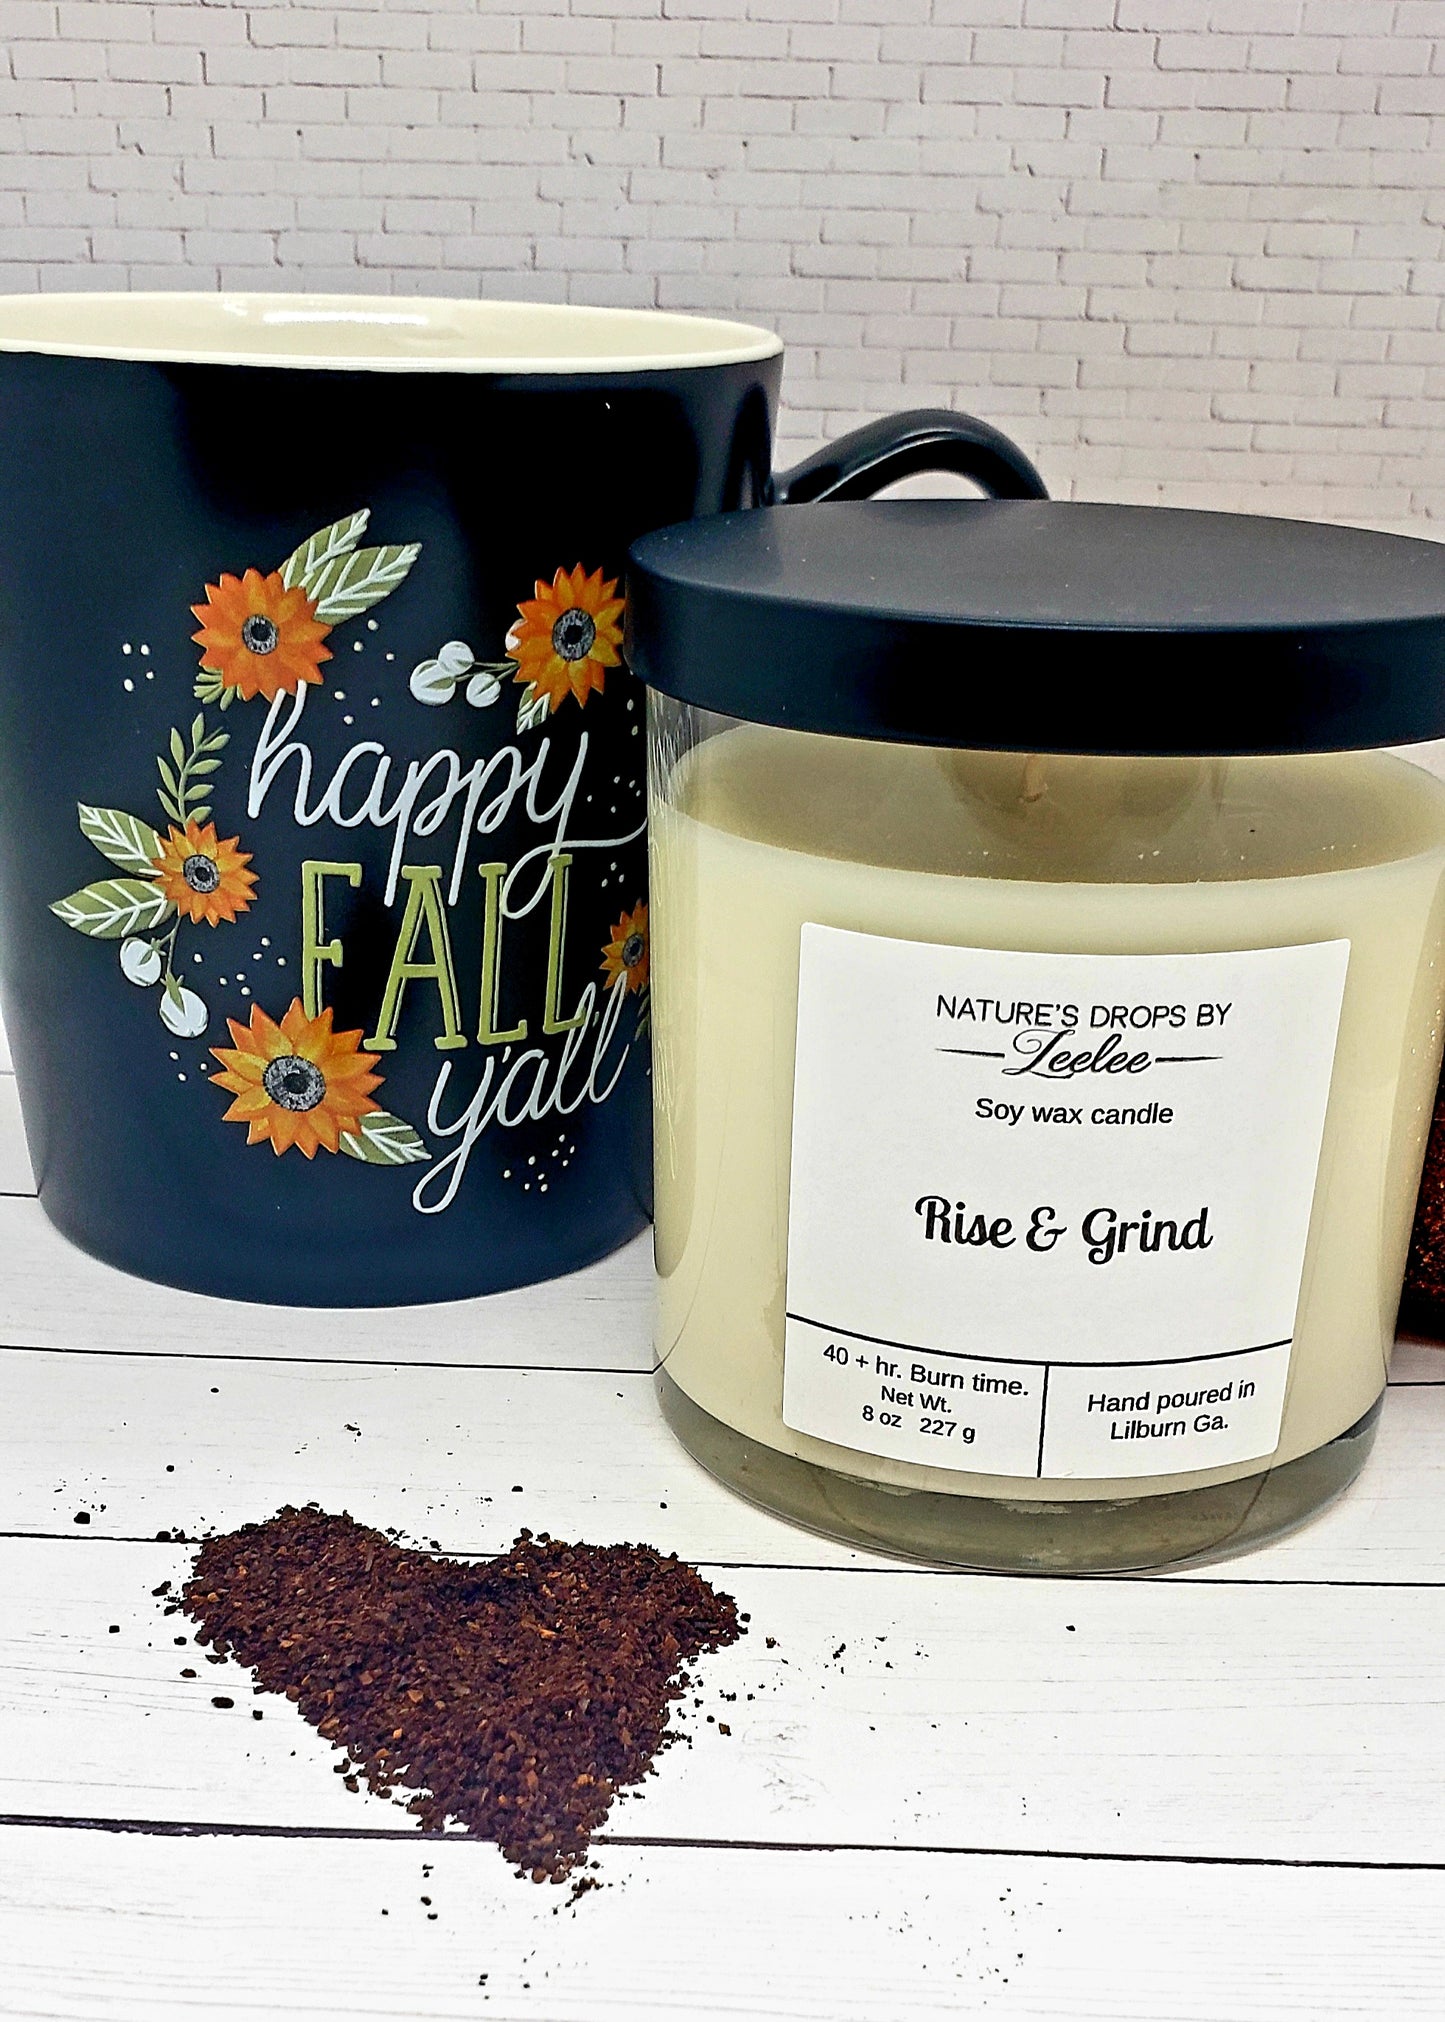 Rise & Grind Soy Candle